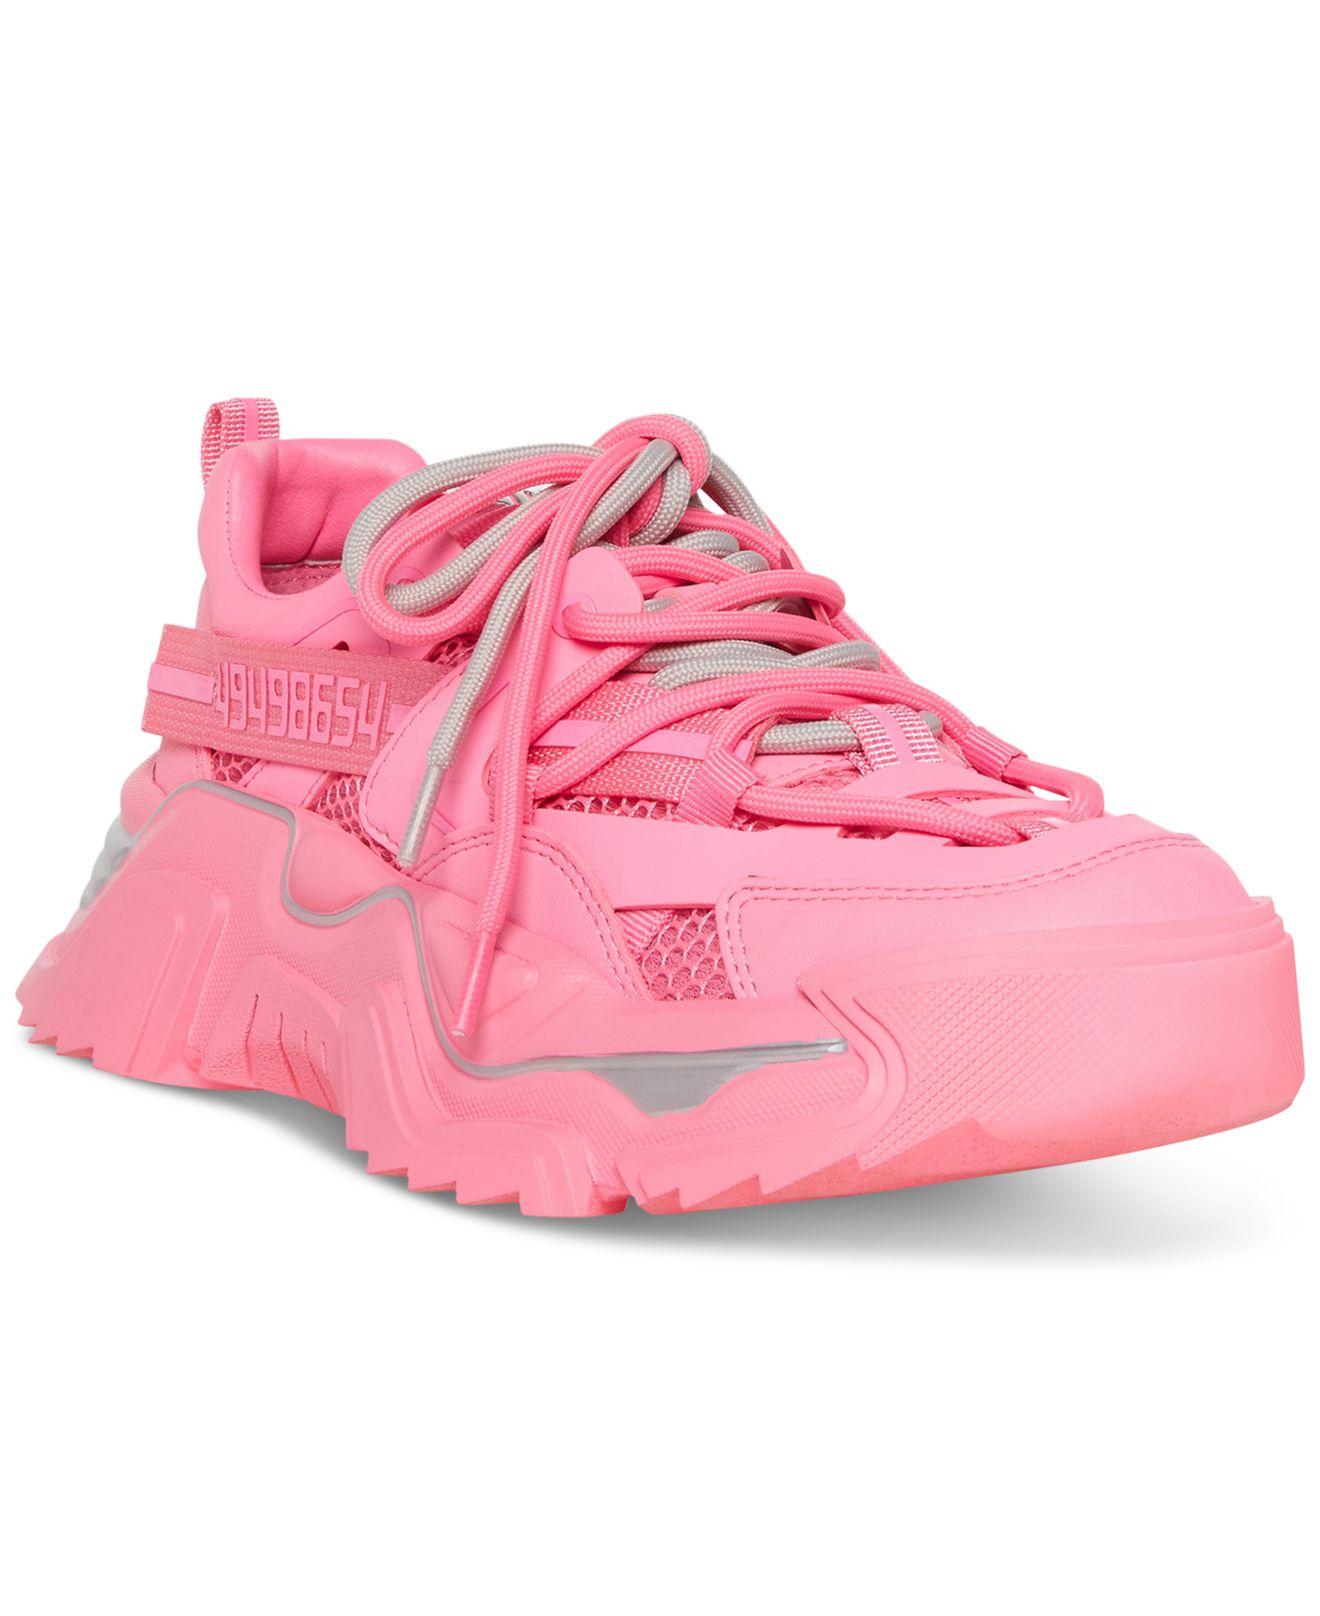 Steve Madden Power Chunky Lace-up Running Sneakers in Pink | Lyst